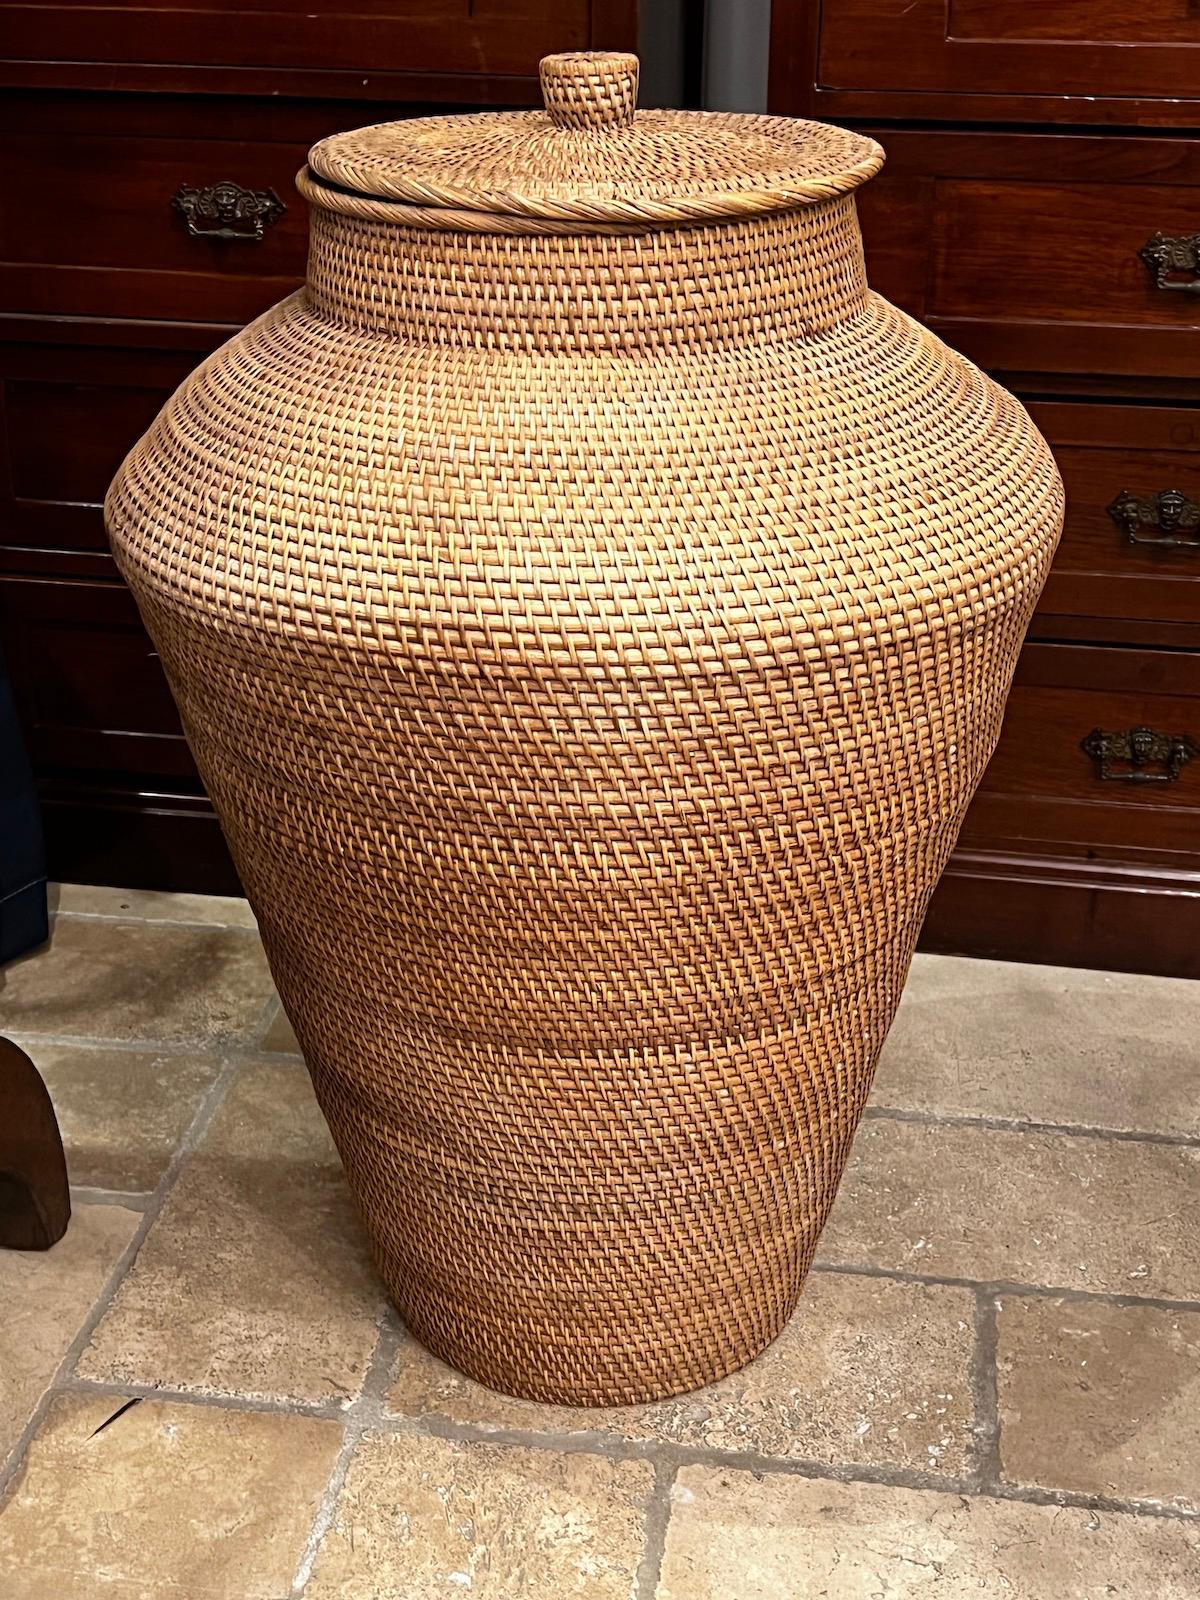 A circa's 1960s large Italian woven rattan basket with lid.

Measurements:
Height: 32